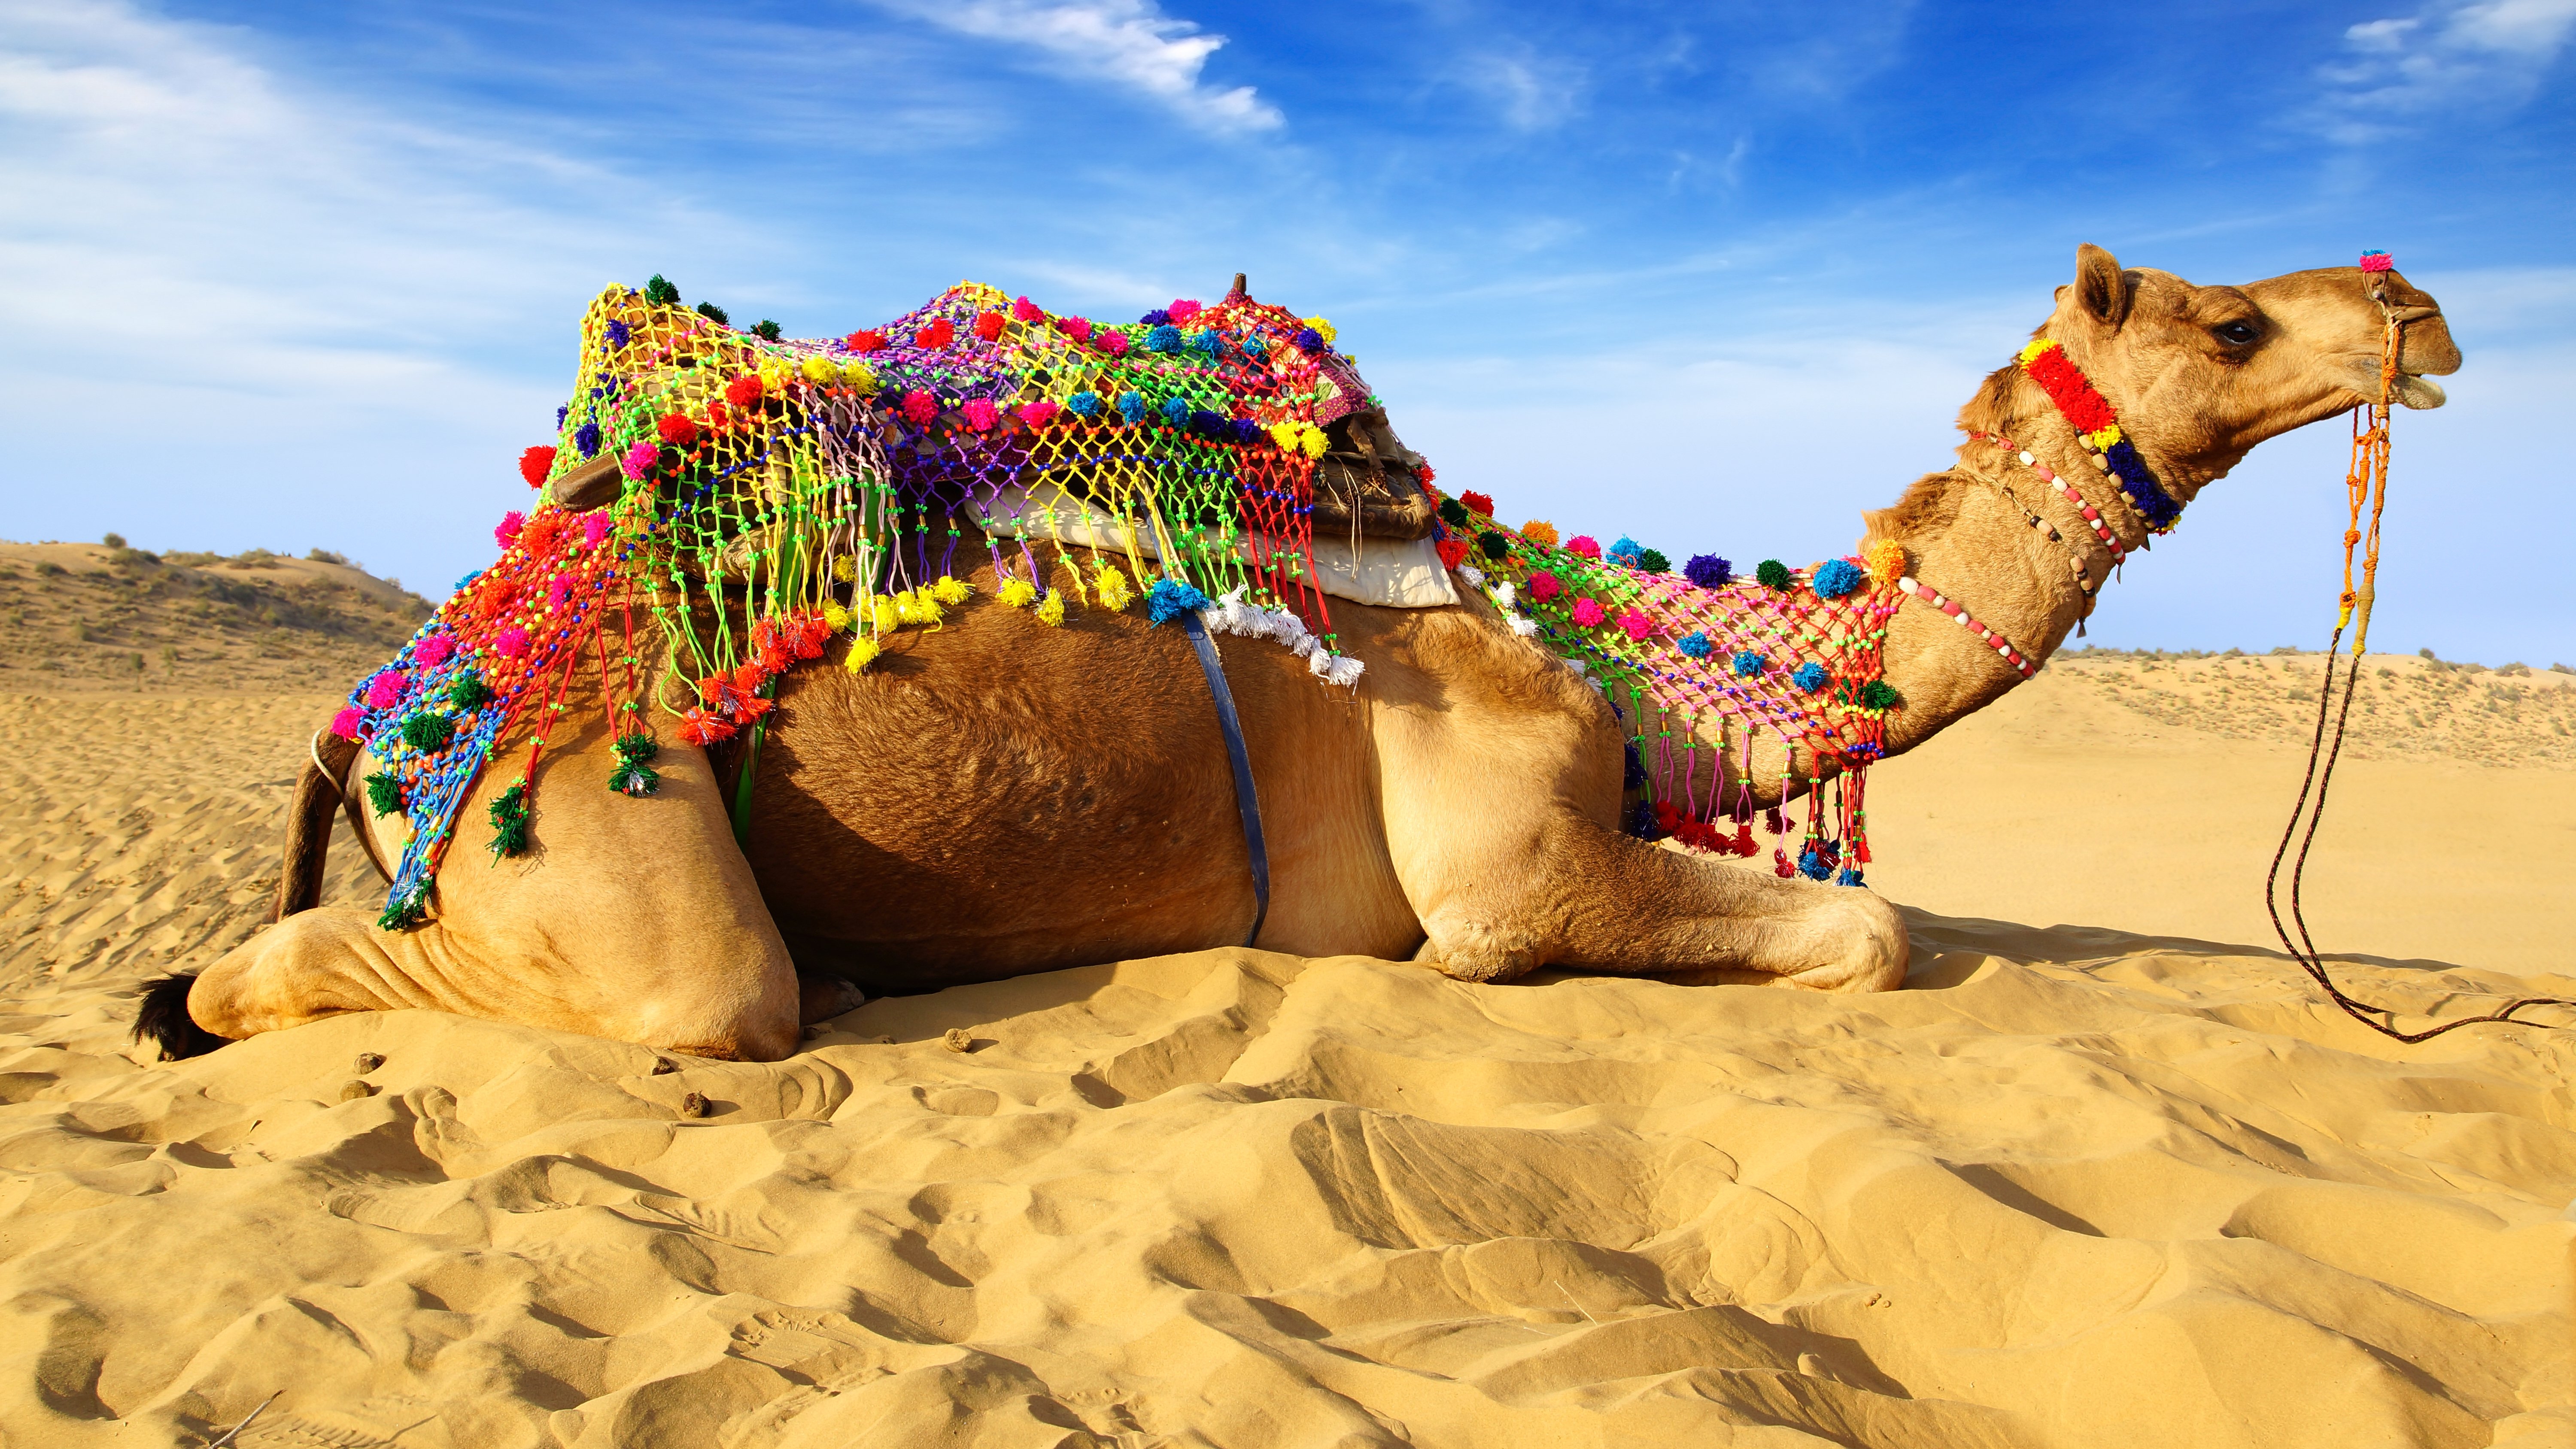 A camel resting on the sand